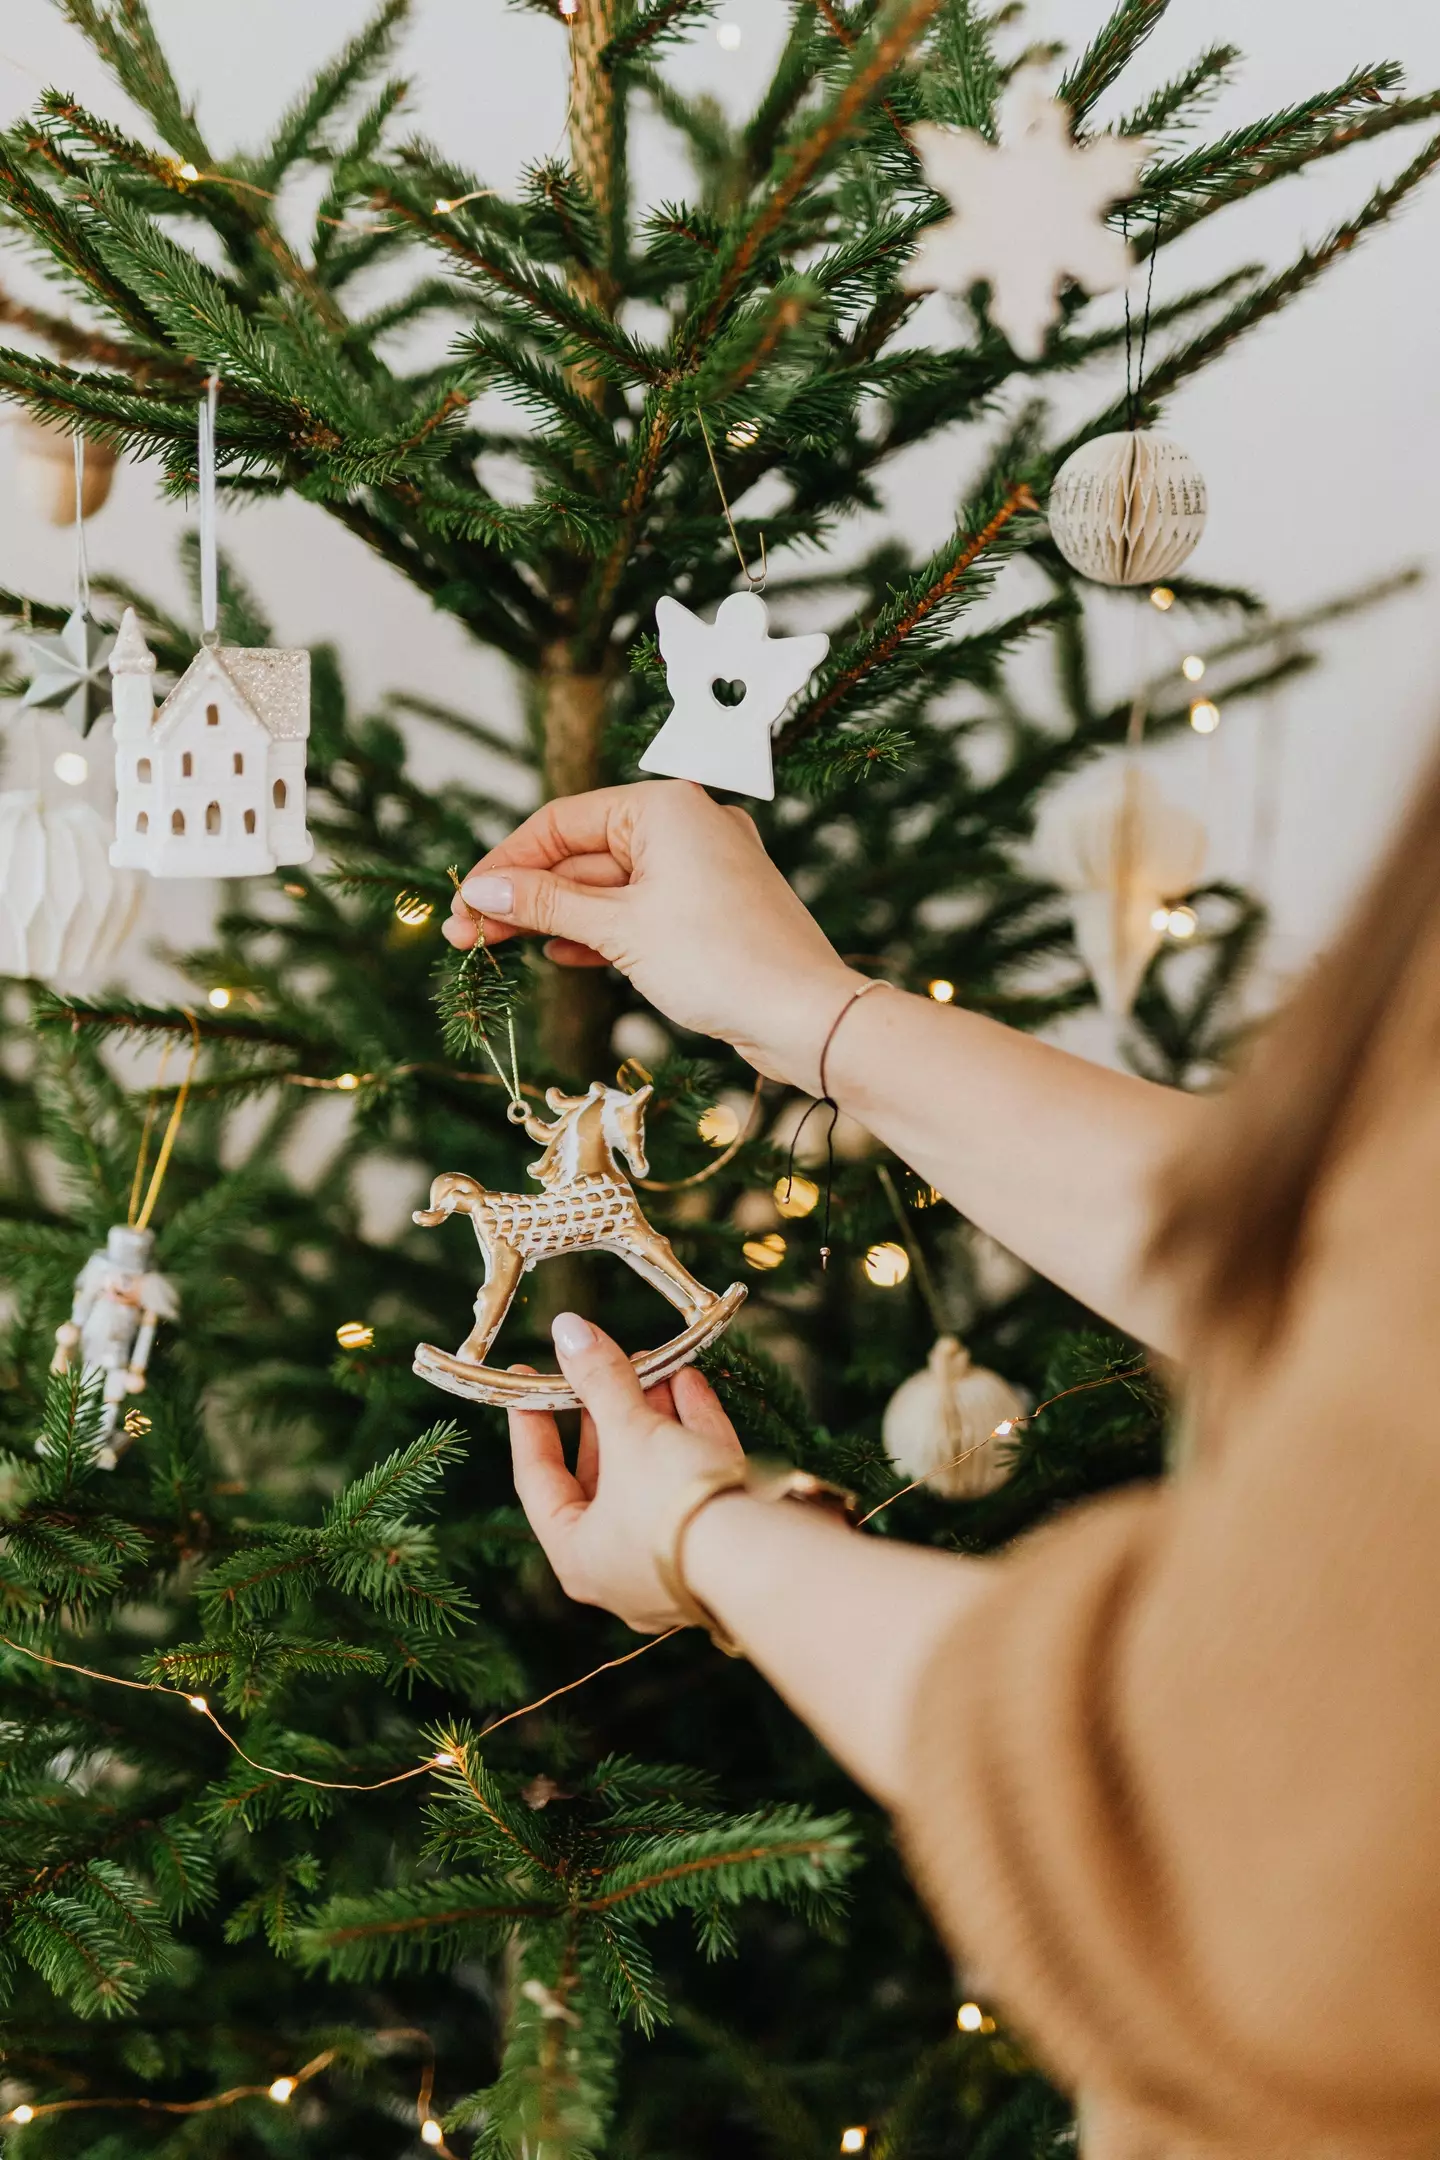 Experts say that Christmas decorations are linked with childhood nostalgia.